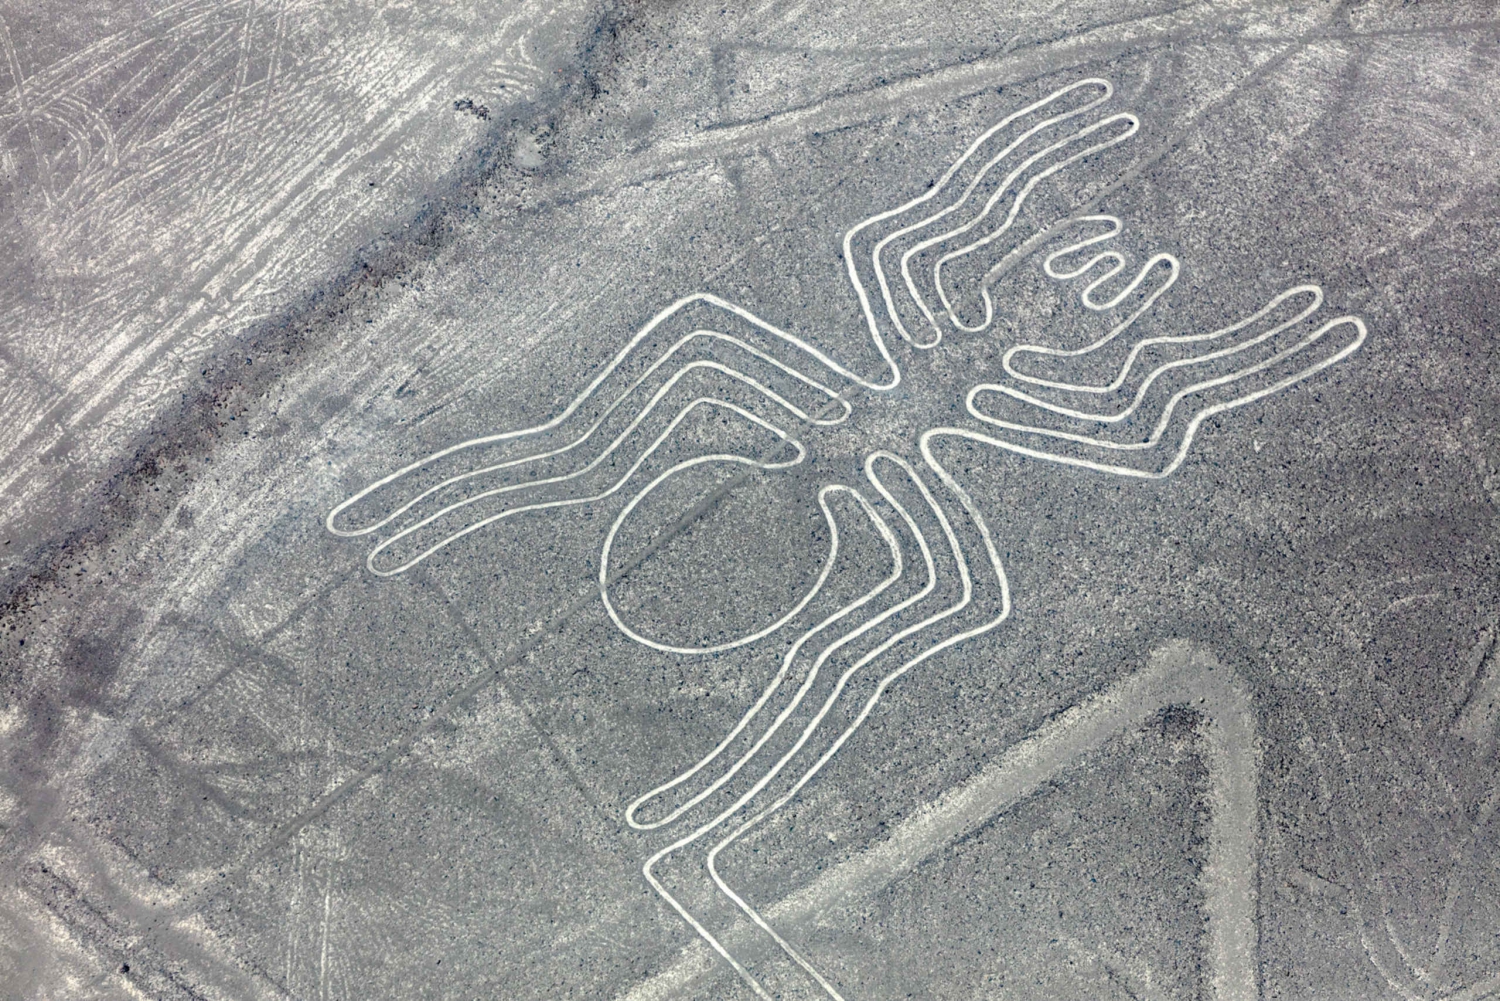 Best tours to Nazca Lines in Peru